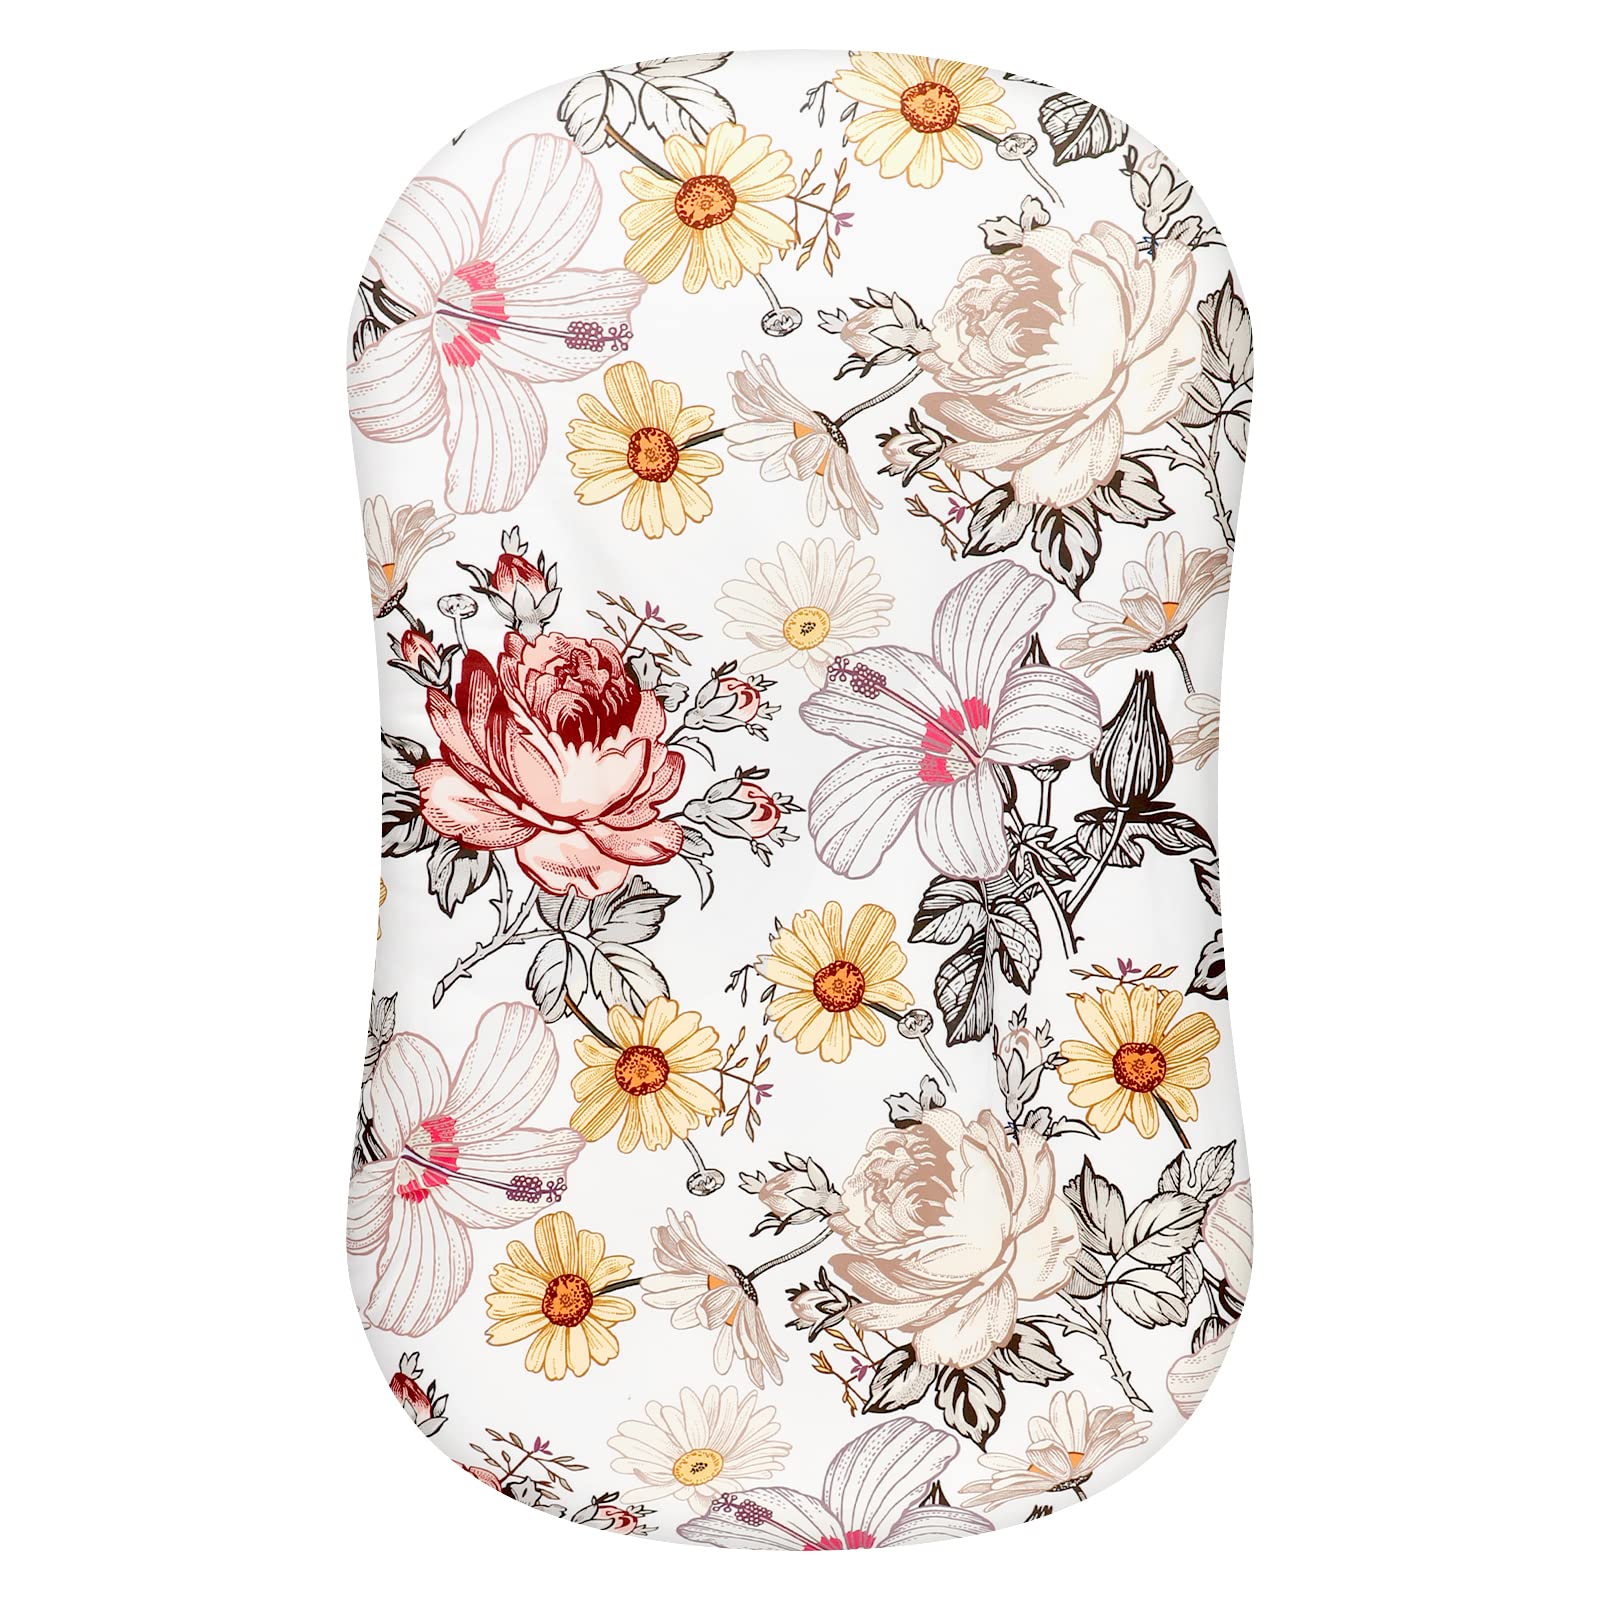 Baby Lounger Cover for Girls, Ultra Soft Breathable Snug Fitted Removable Infant Lounger Cover Replacement for Newborns, Stylish Floral Patterns